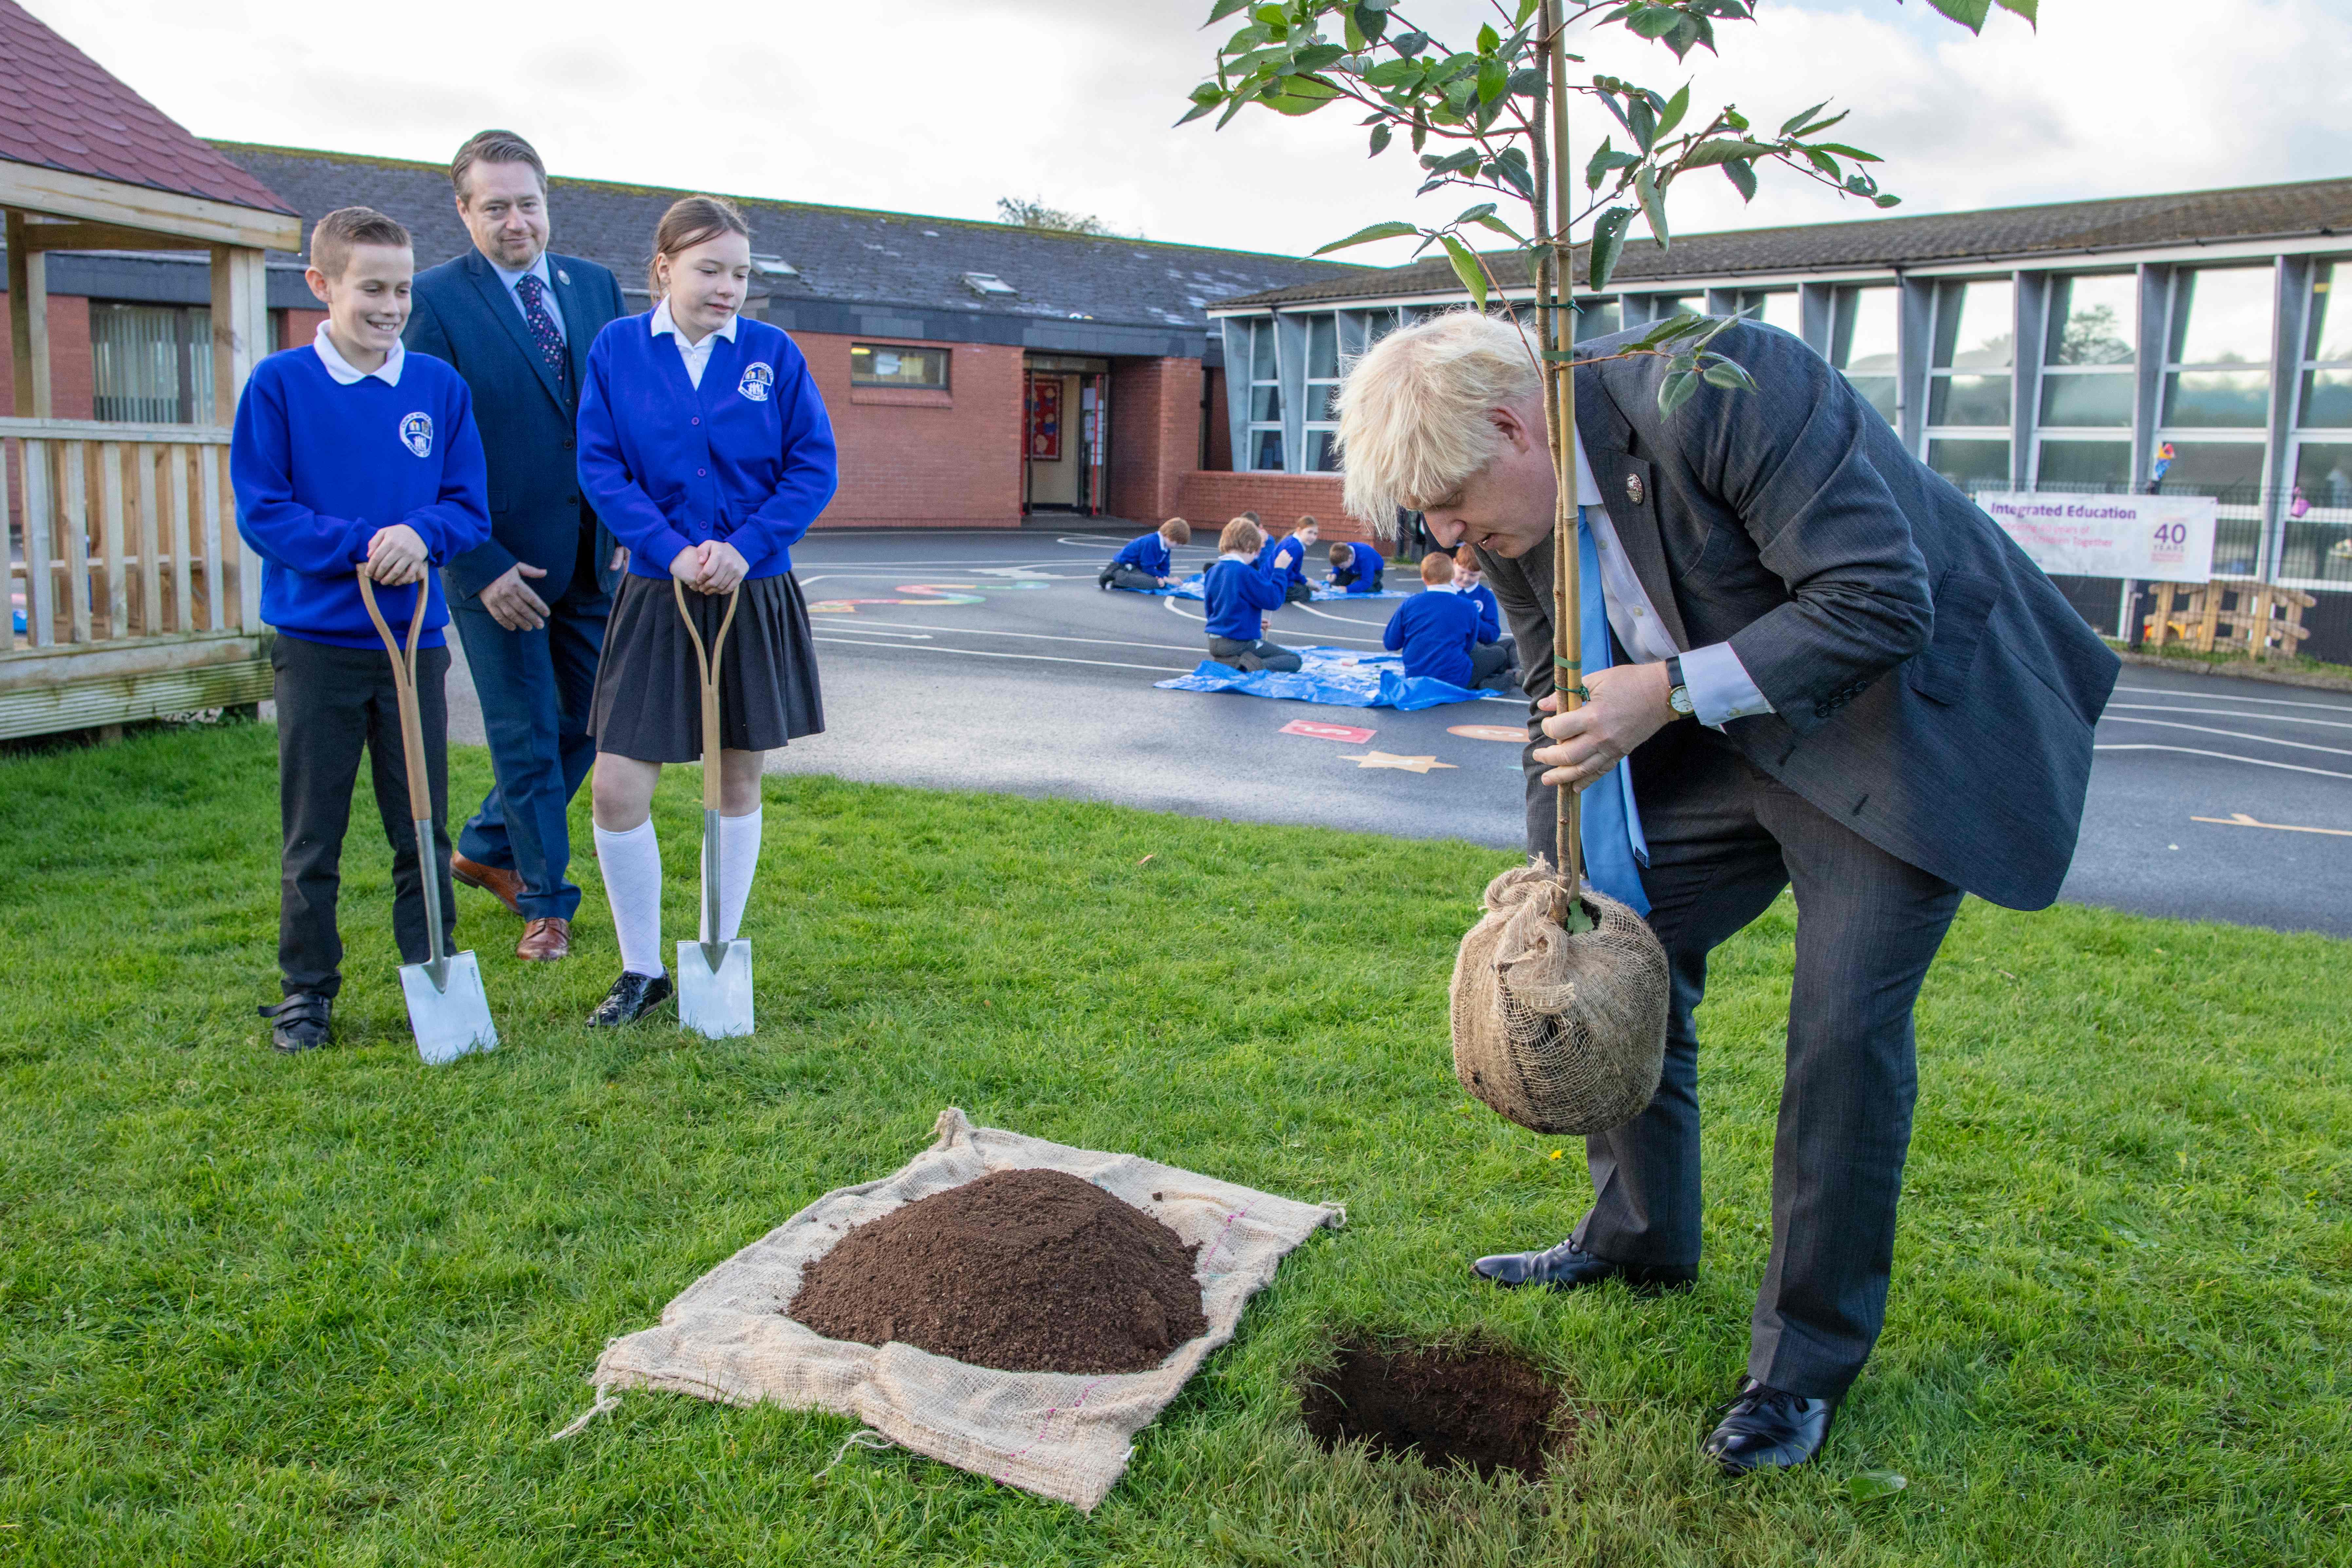 The PM planting a tree at a school in County Antrim last week